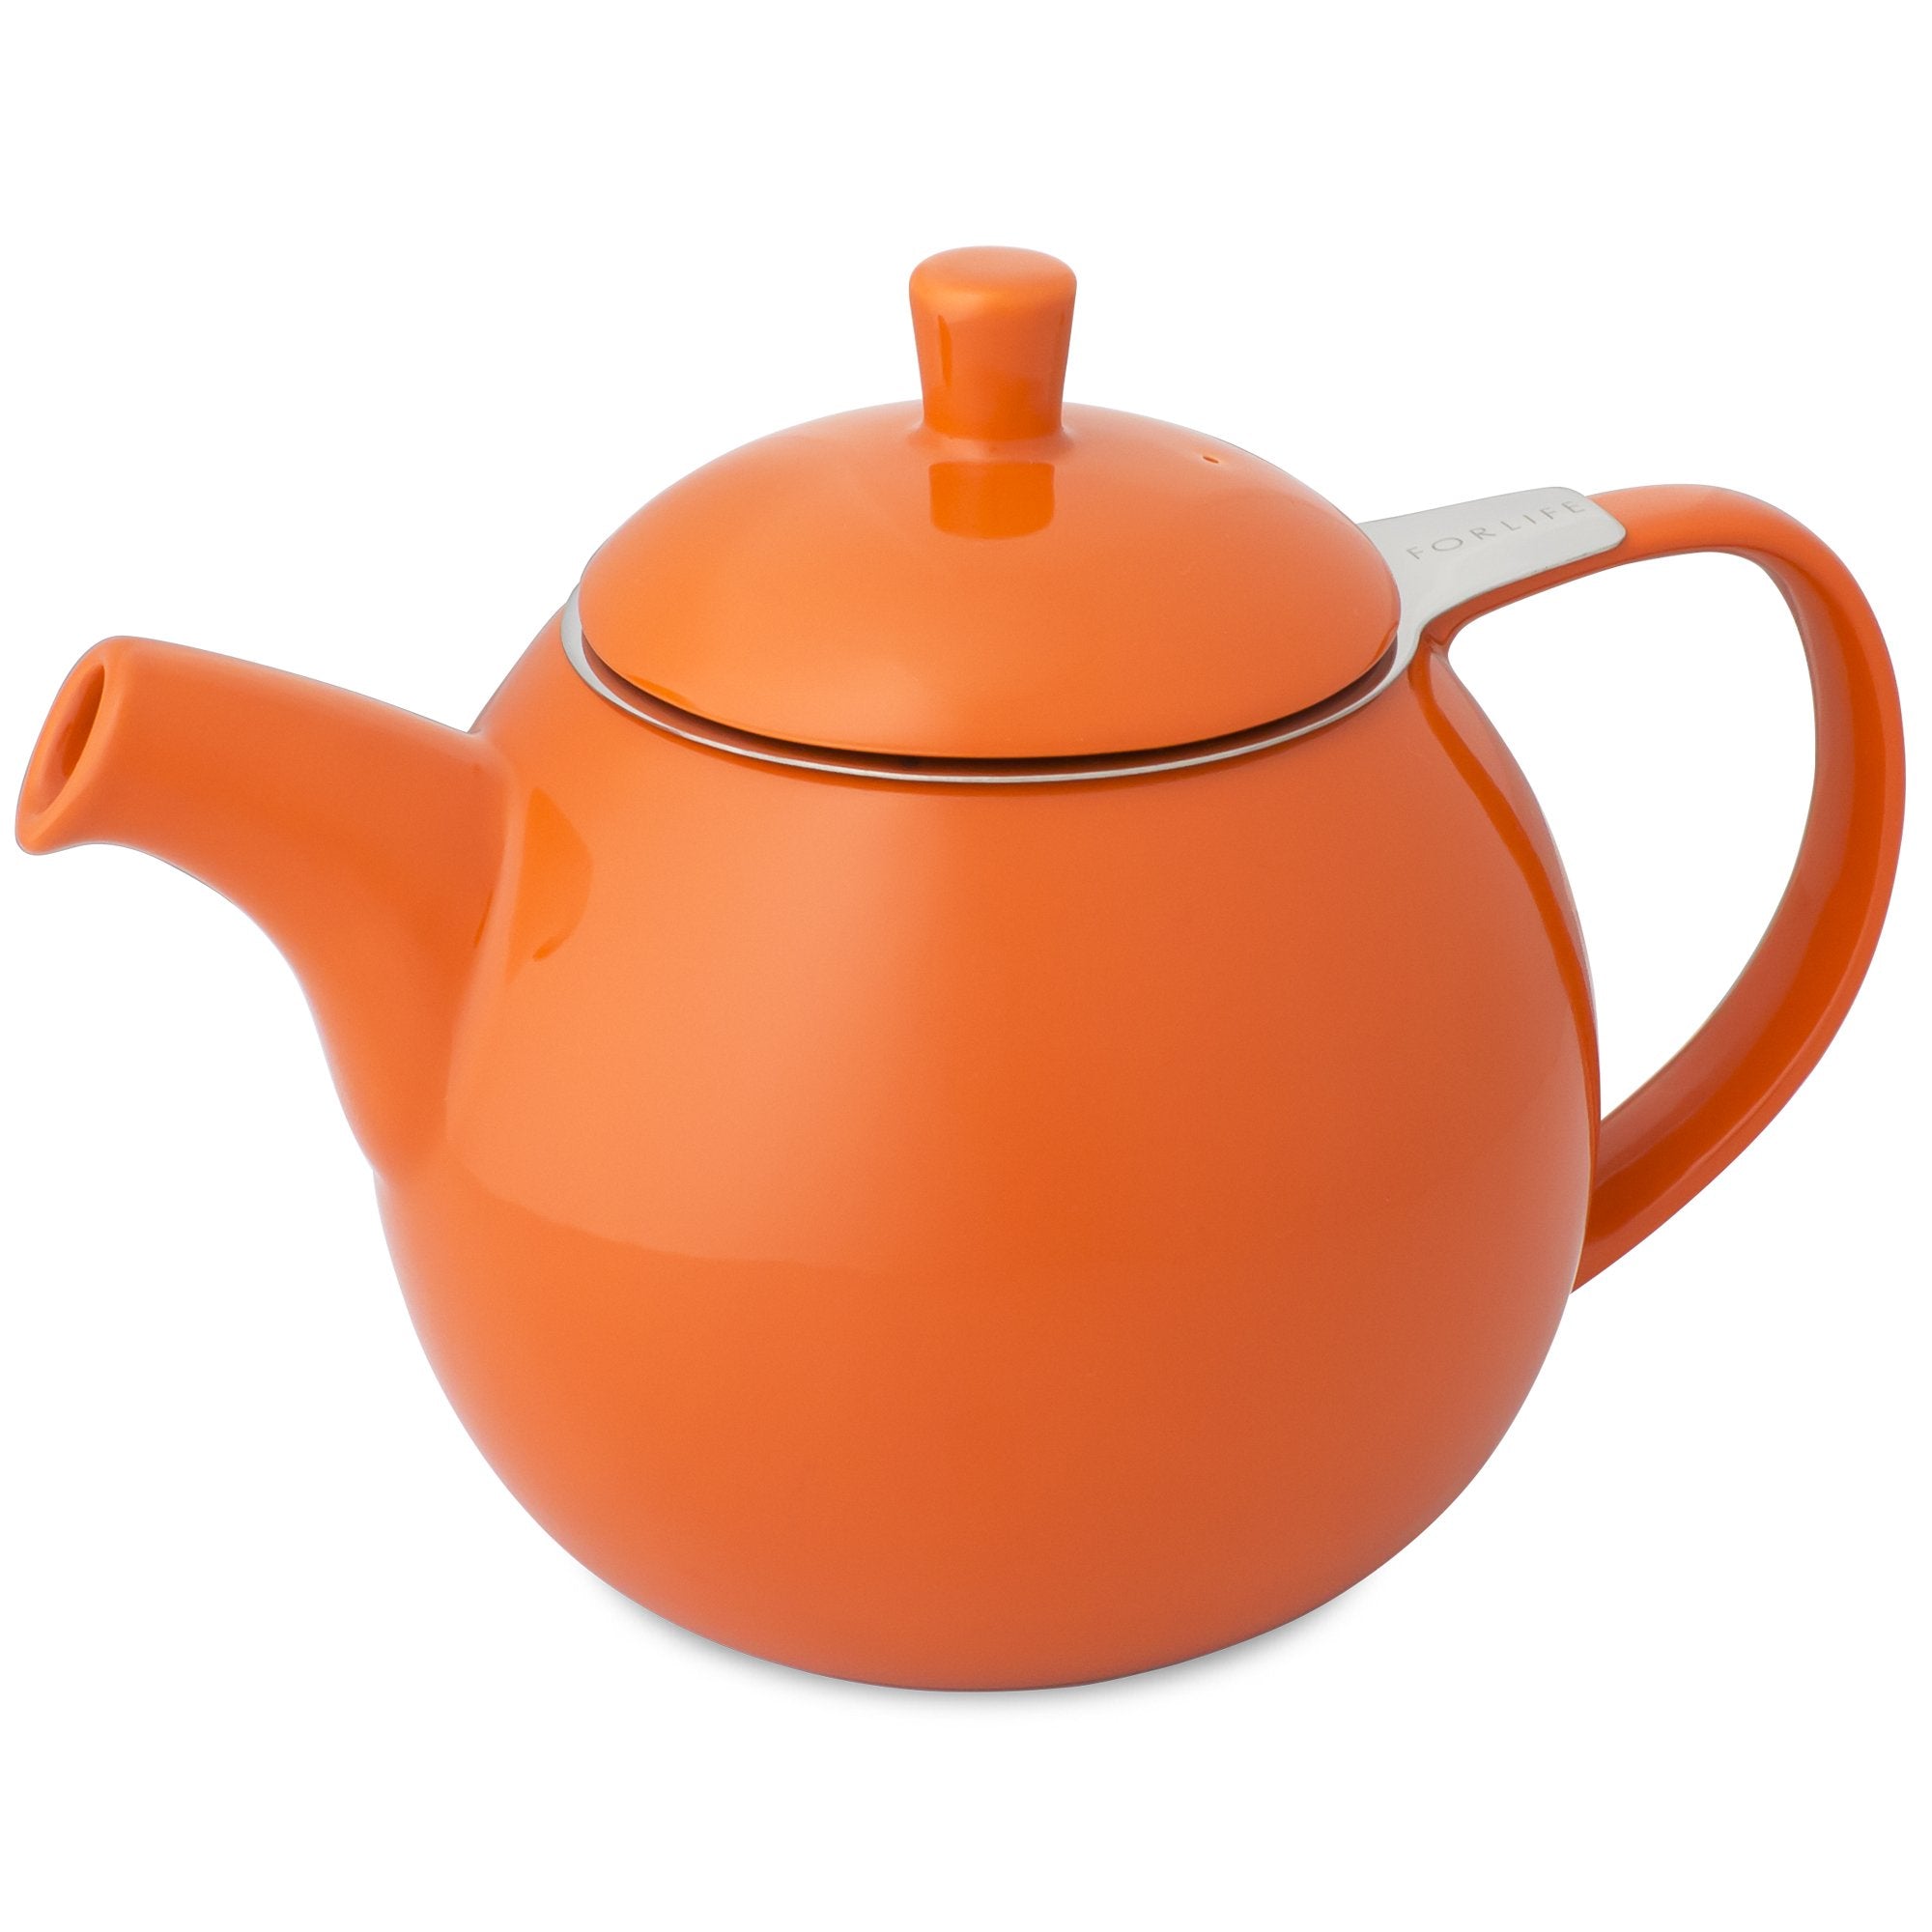 TeaLula 24 oz Curve sphere carrot orange colored Teapot glossy surface finish and attached lid